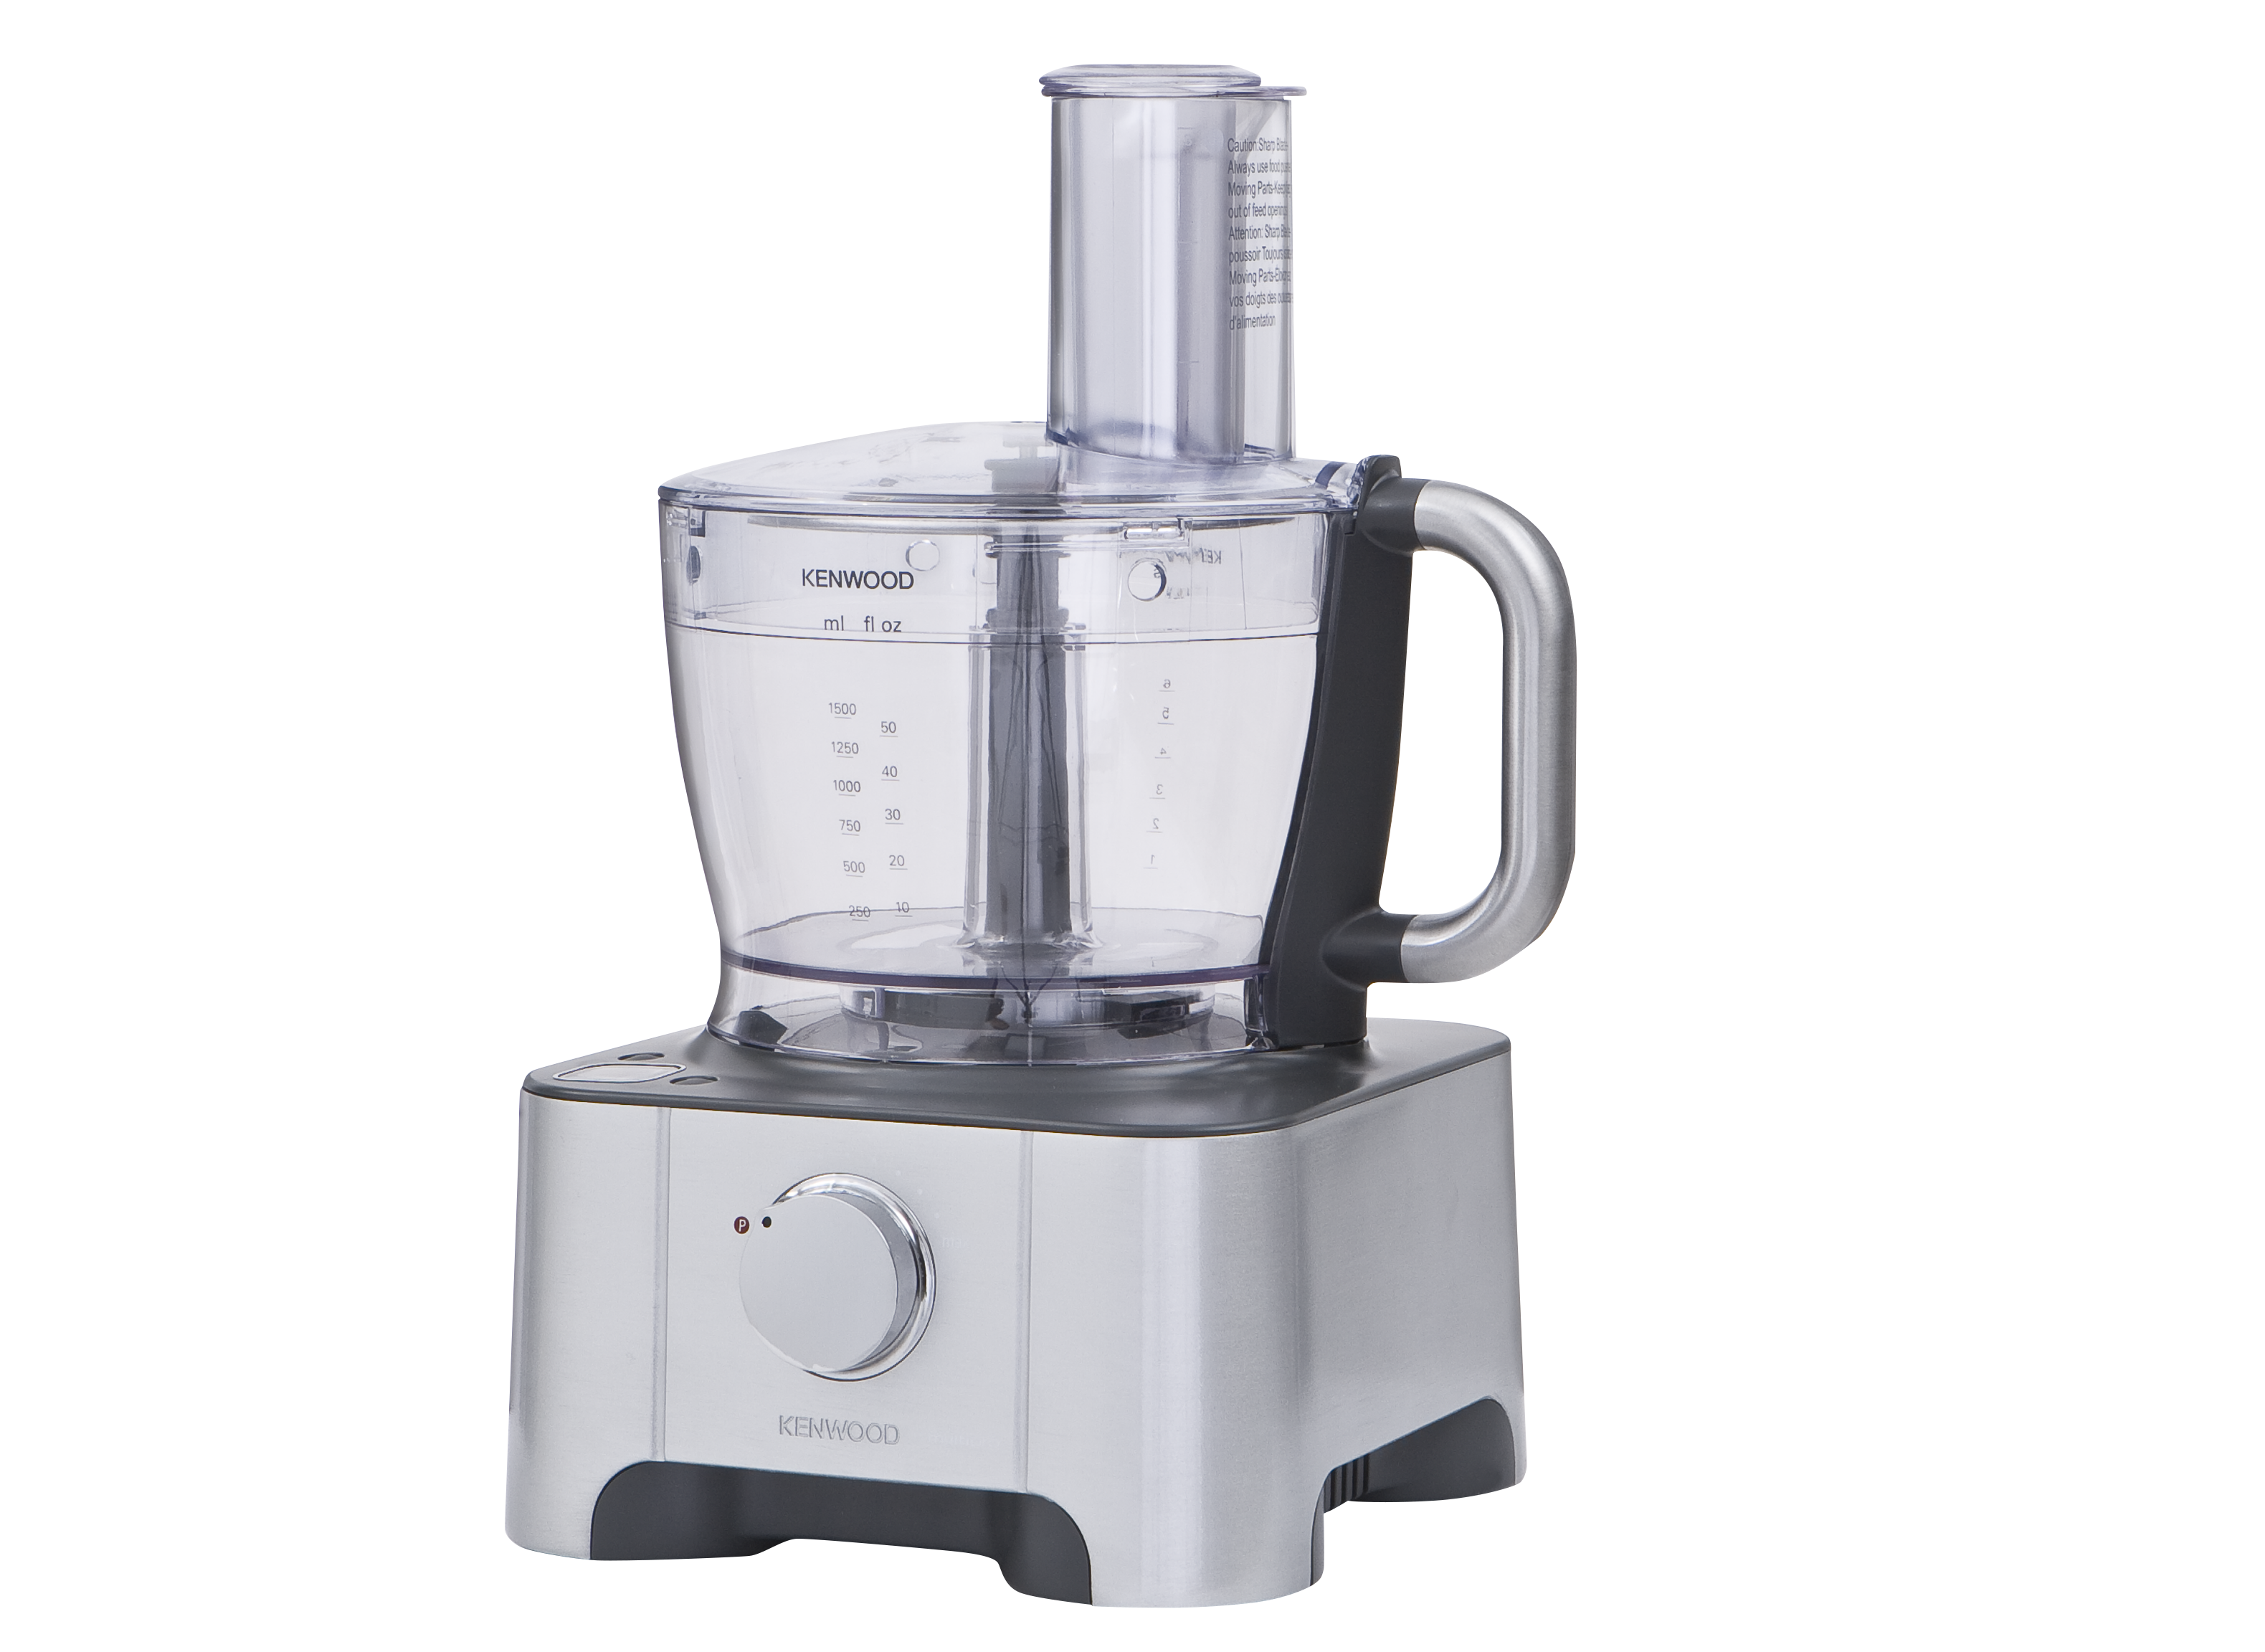 Hare båd mad Kenwood Multipro Classic FP959 Food Processor & Chopper Review - Consumer  Reports